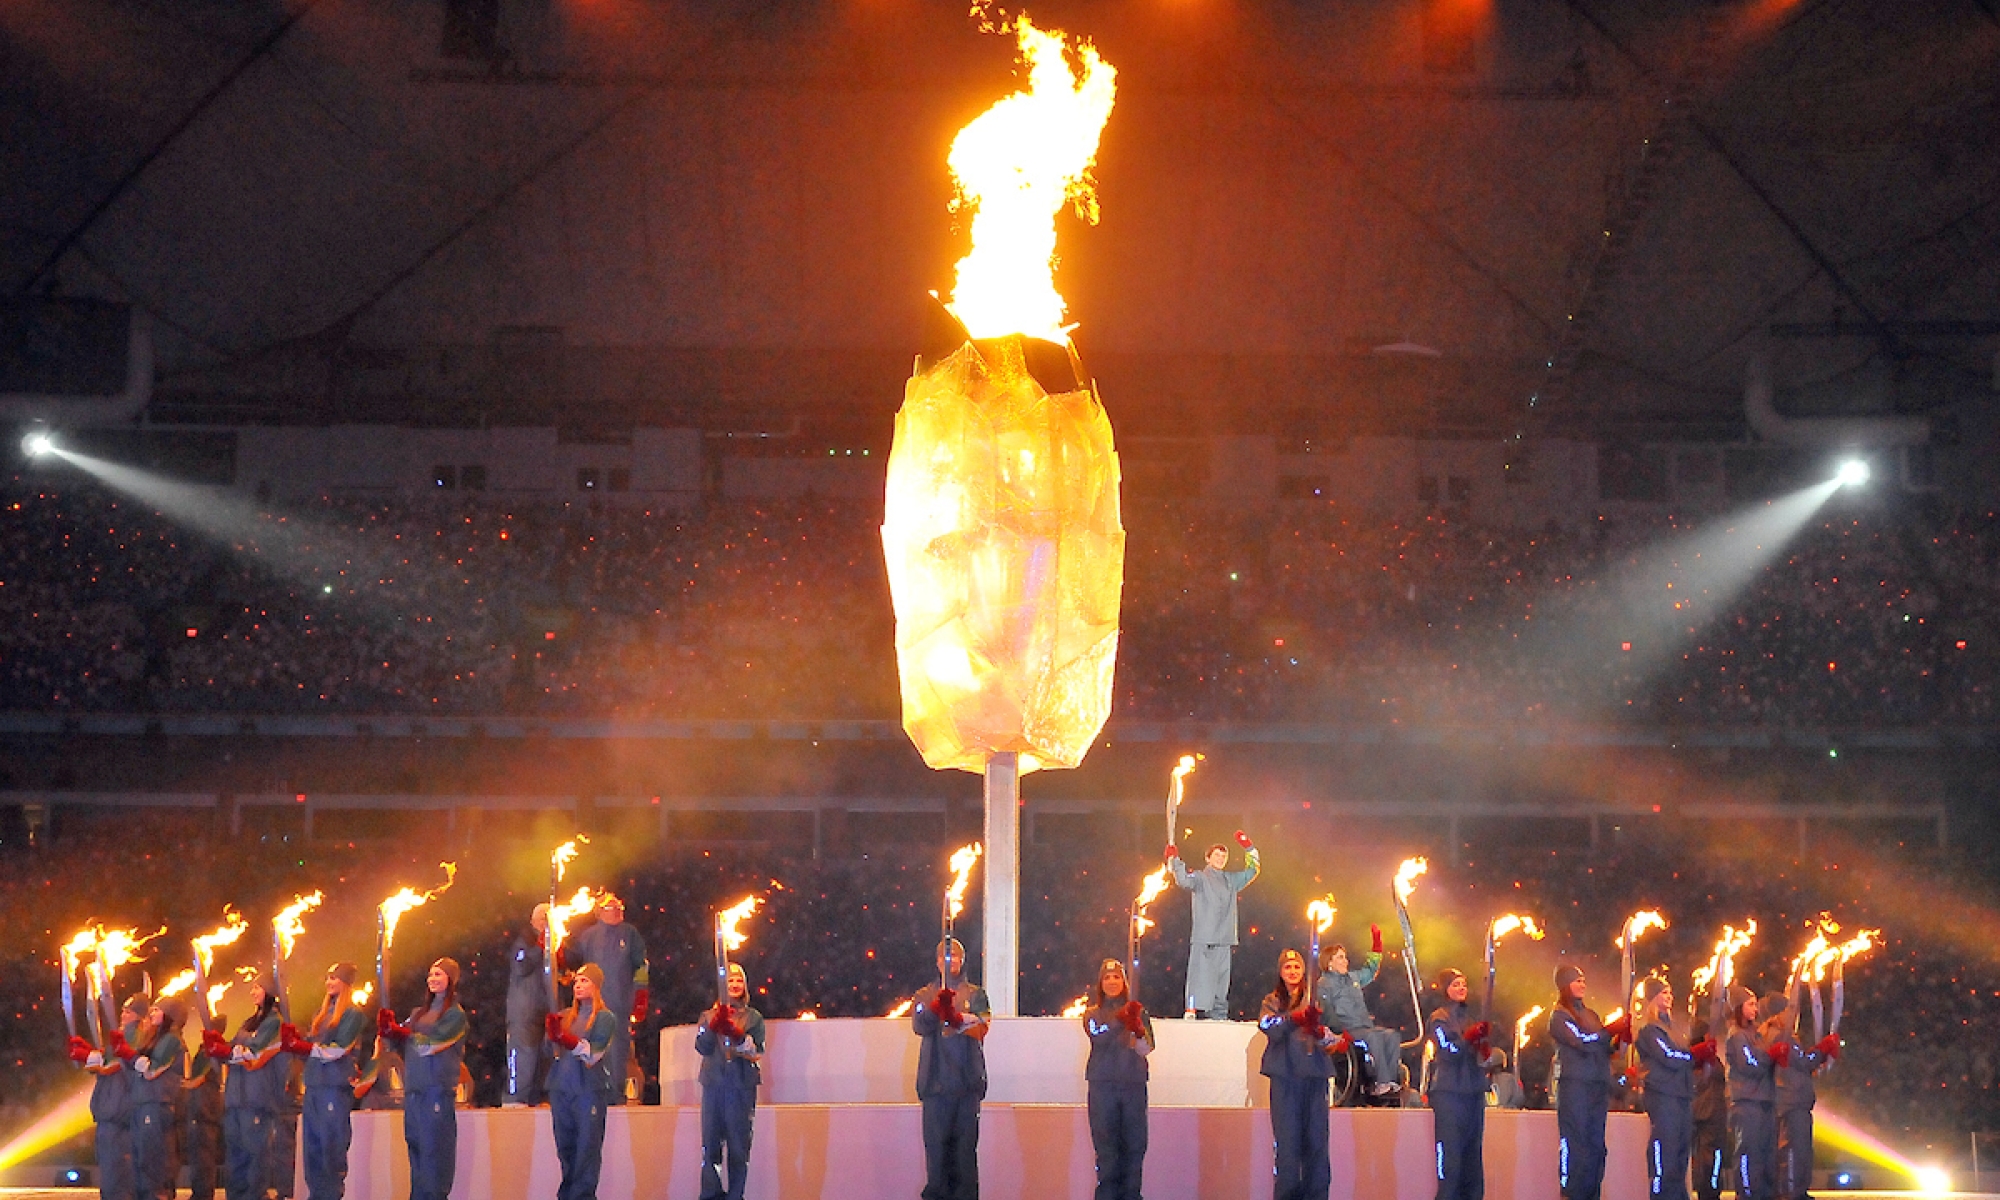 Paralympic flame at the opening ceremonies in Vancouver